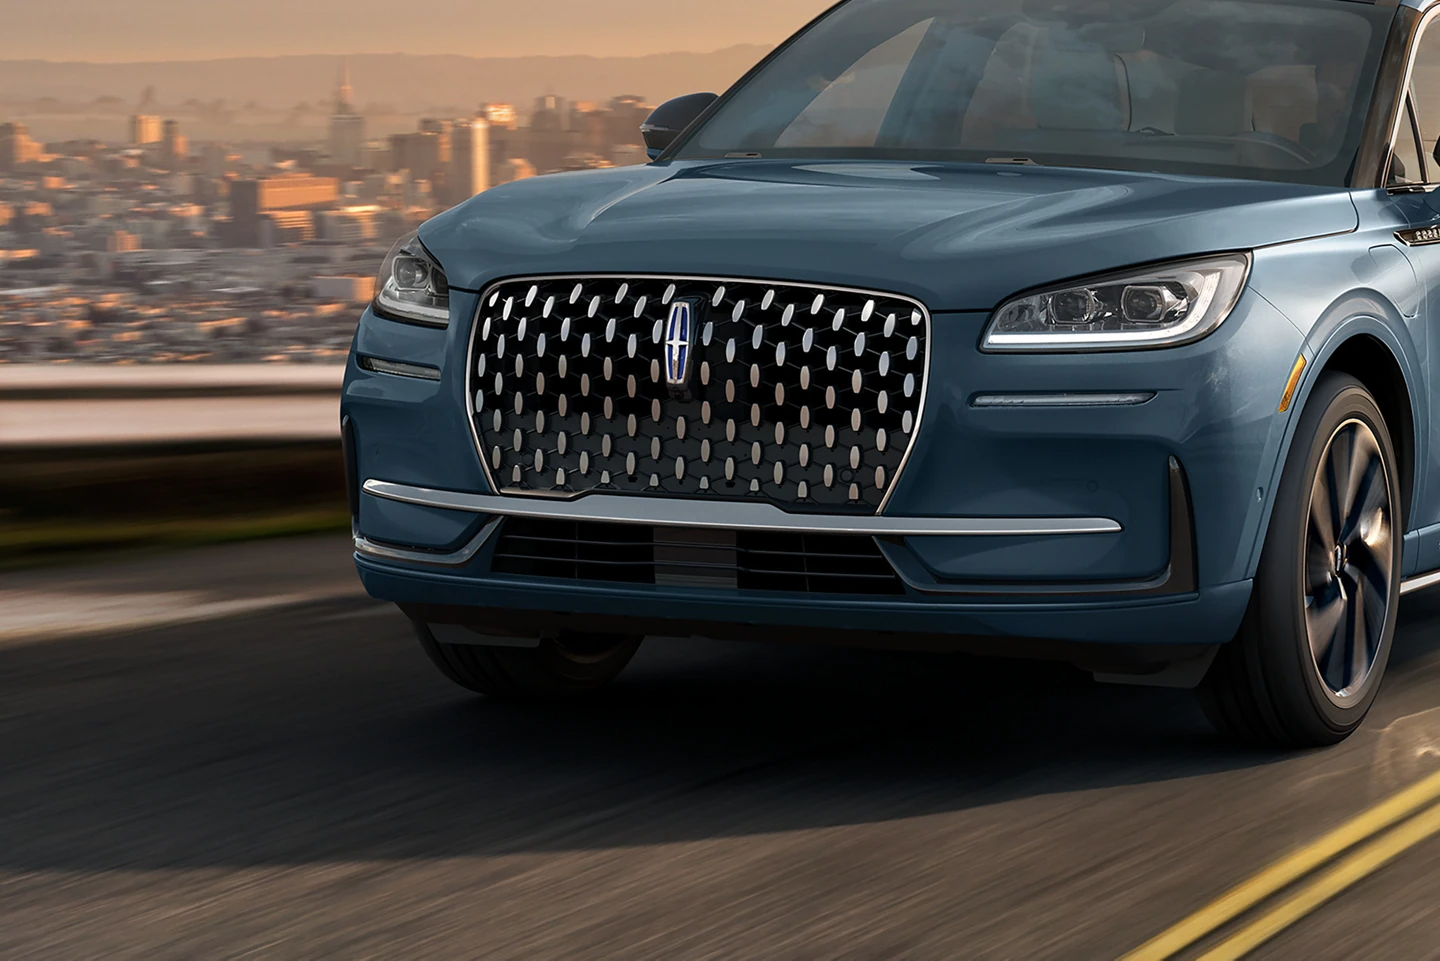 Trim Levels of the 2023 Lincoln Corsair near Seattle